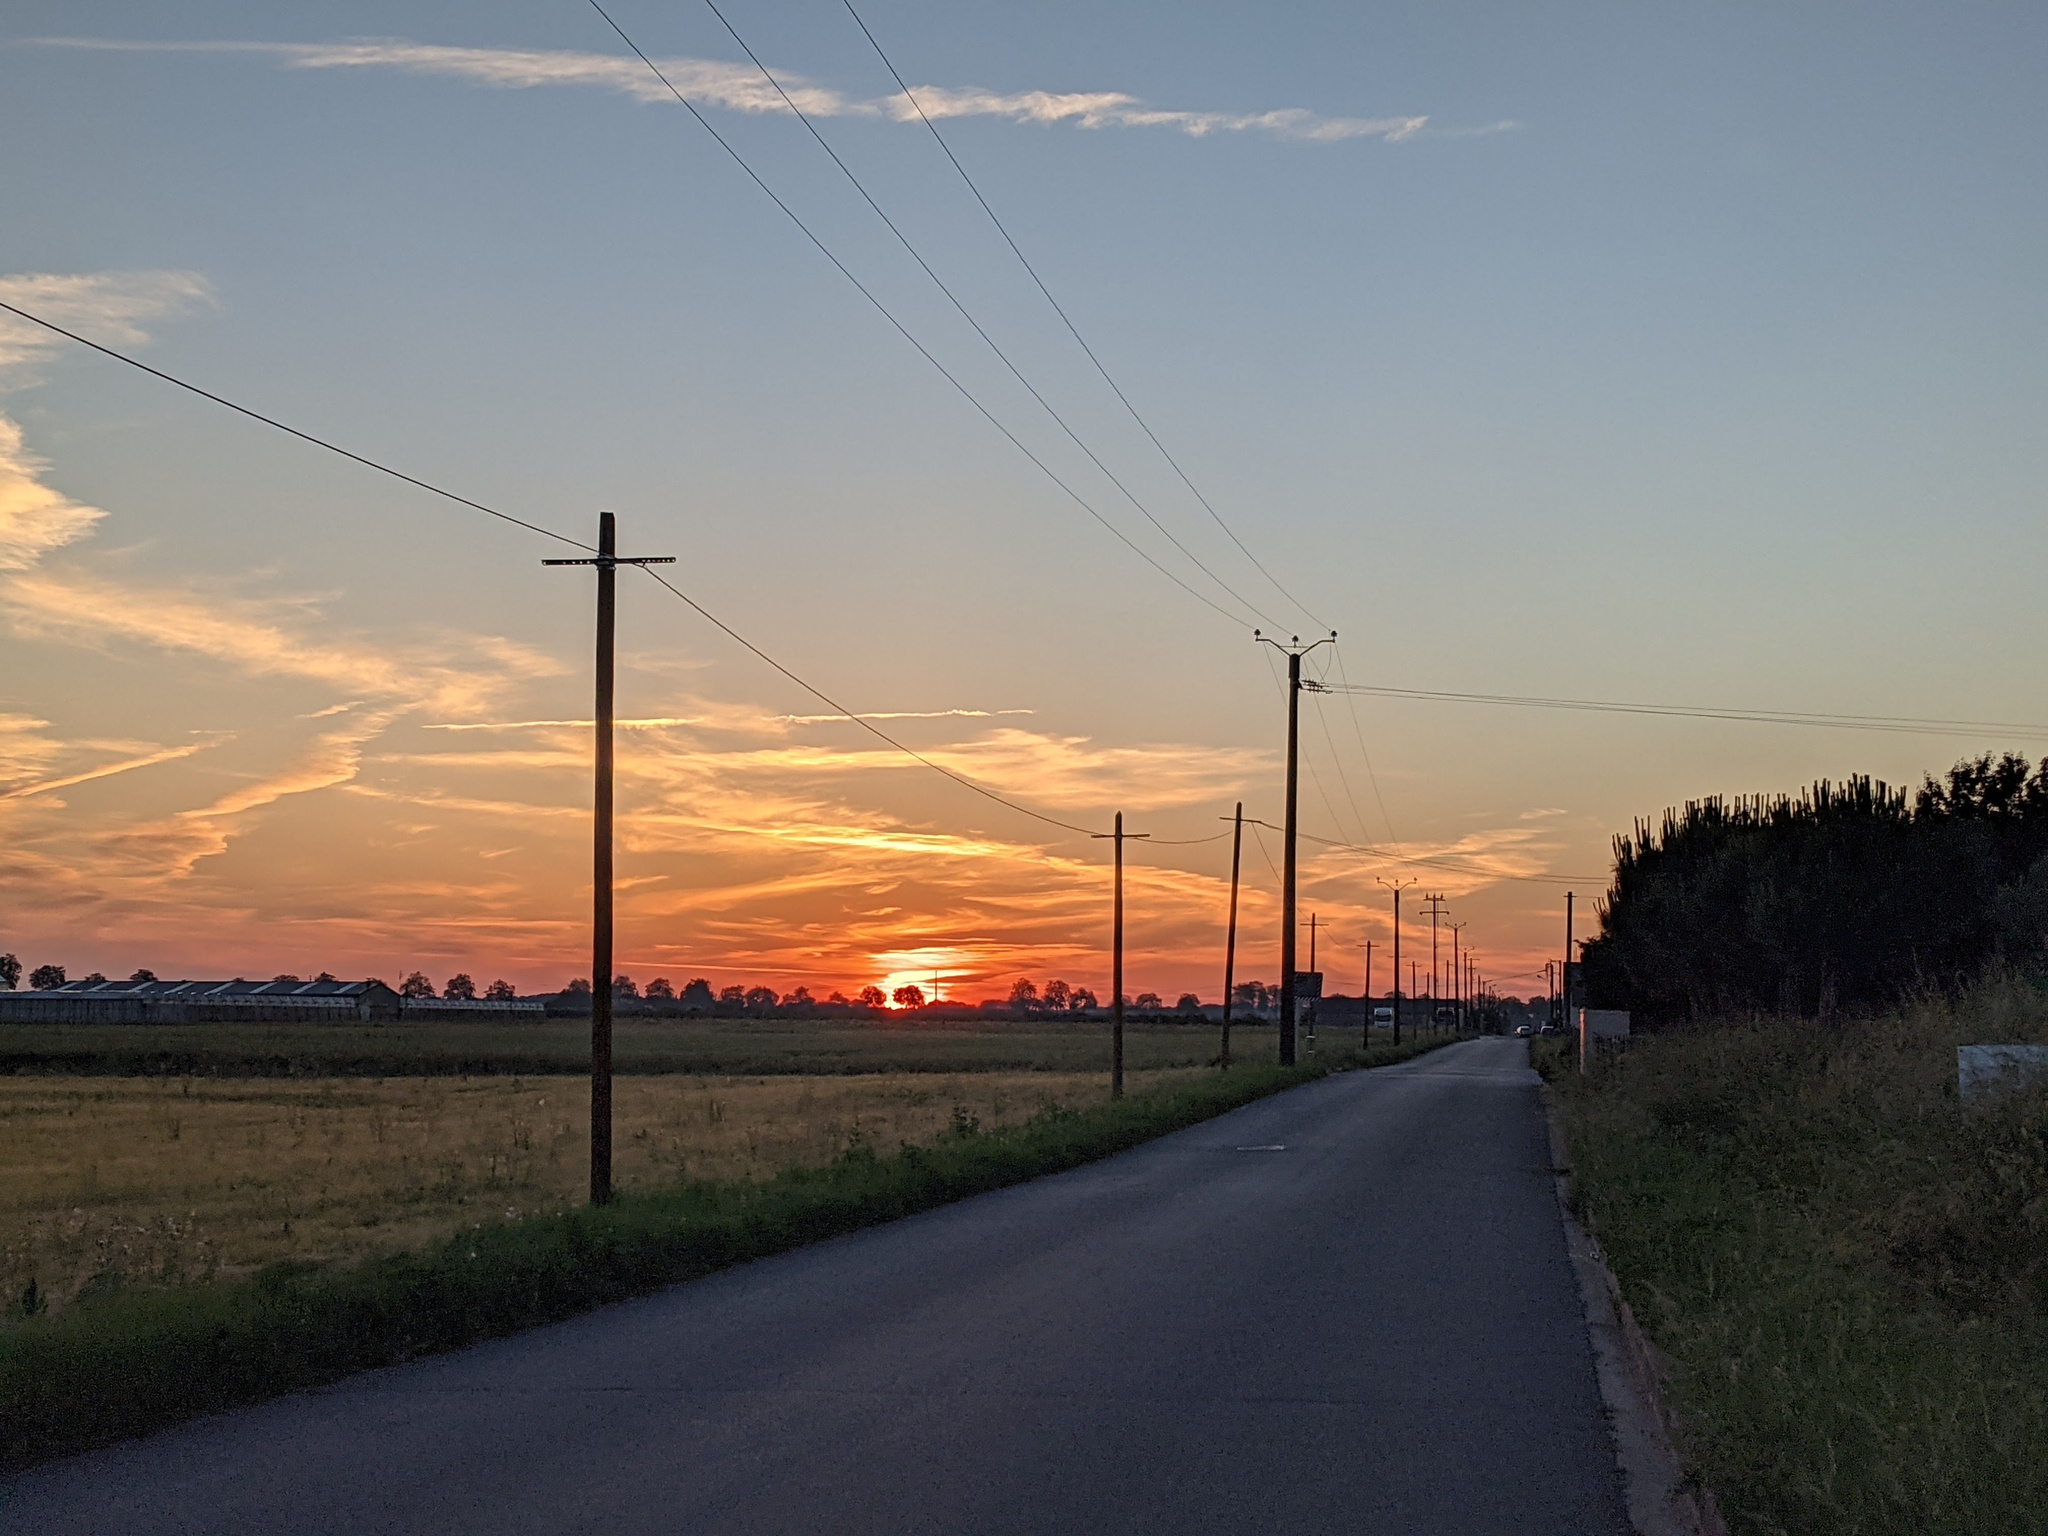 At dawn - My, Zarya, dawn, Morning, The photo, Mobile photography, Poppy, Road, Sky, , Sunrise, Field, Plants, beauty of nature, France, Orleans, Longpost